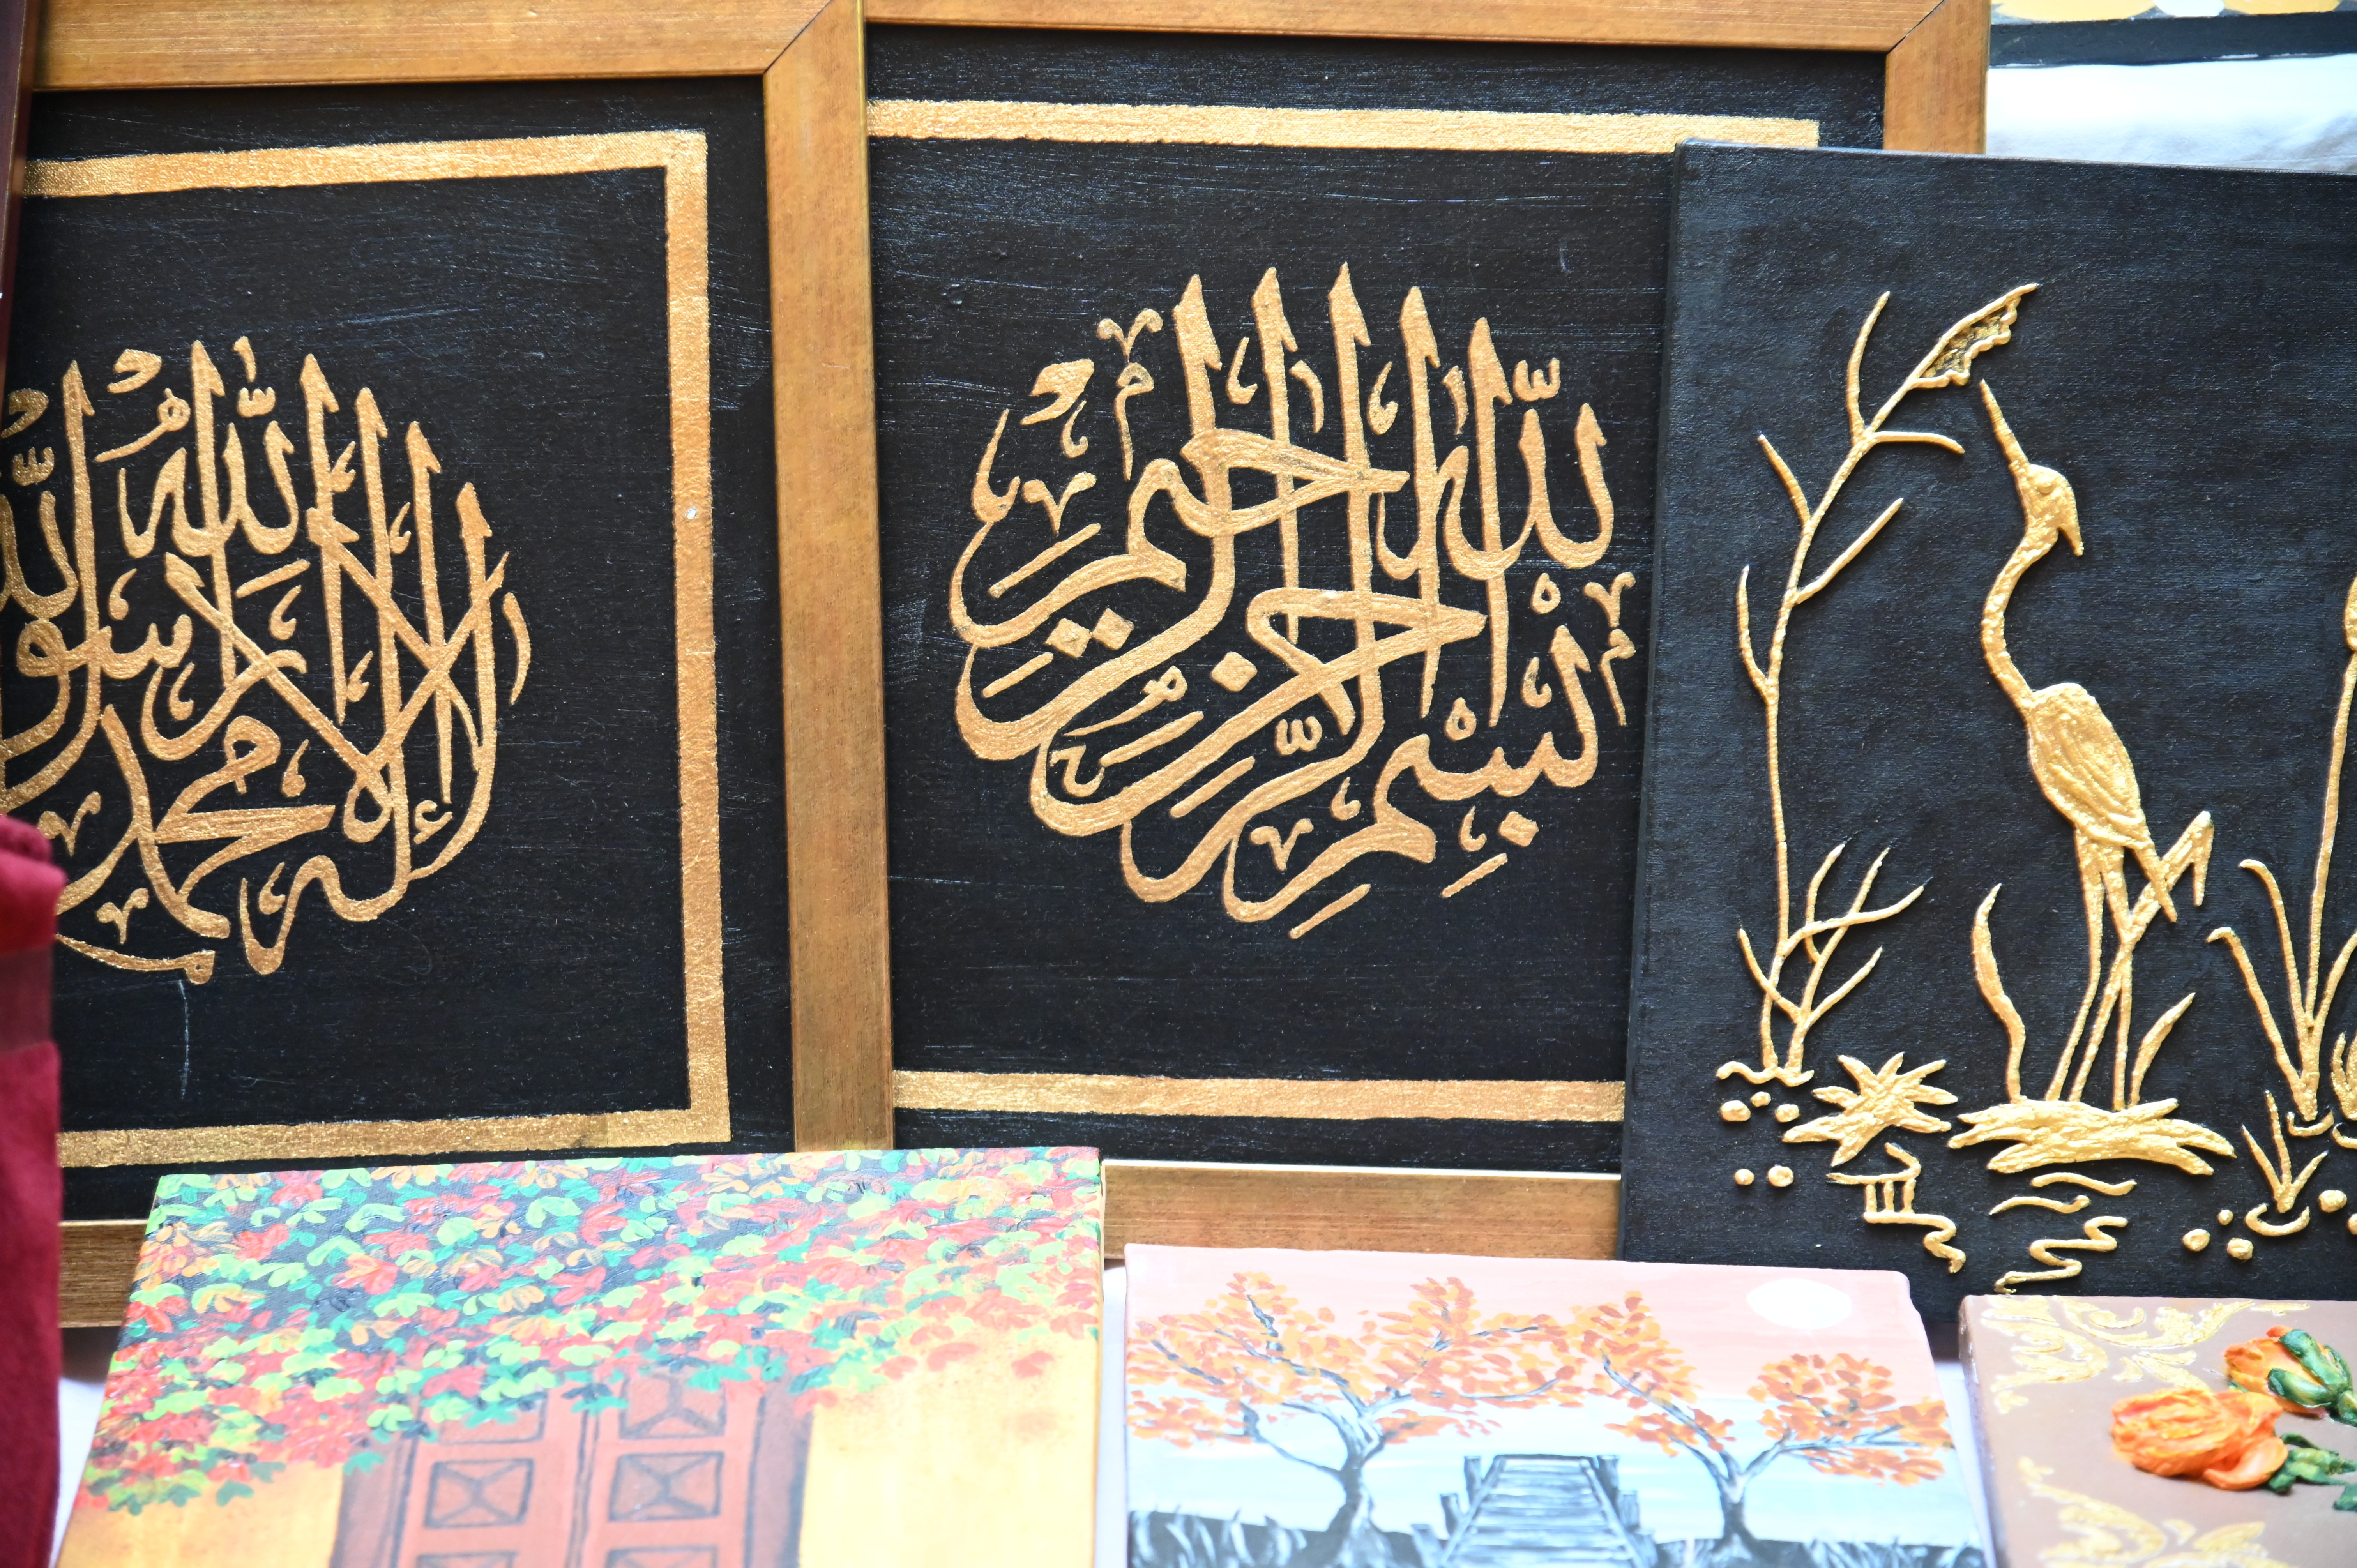 The beautiful paintings and the mosaic of Arabic calligraphy